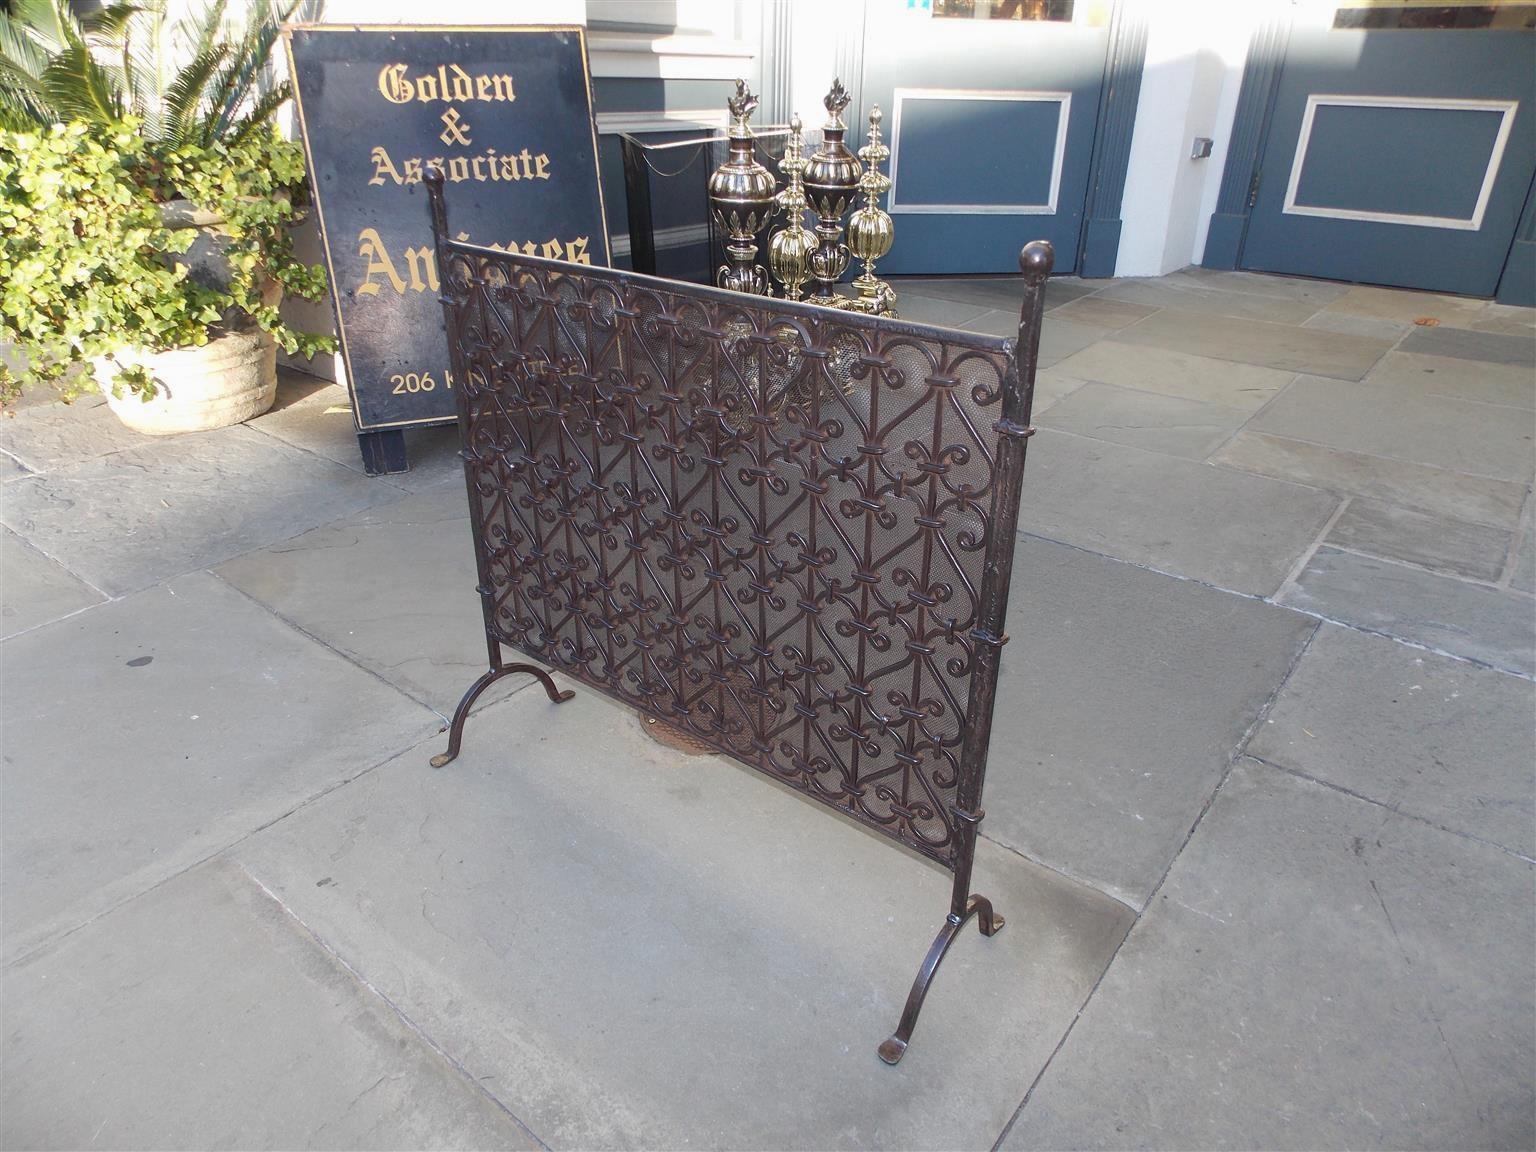 American wrought iron free standing fire screen with flanking ball finials, decorative scrolled centered panel with interior lined mesh, tapered supporting columns, and terminating on scrolled legs with stylized penny feet, Early 19th Century.